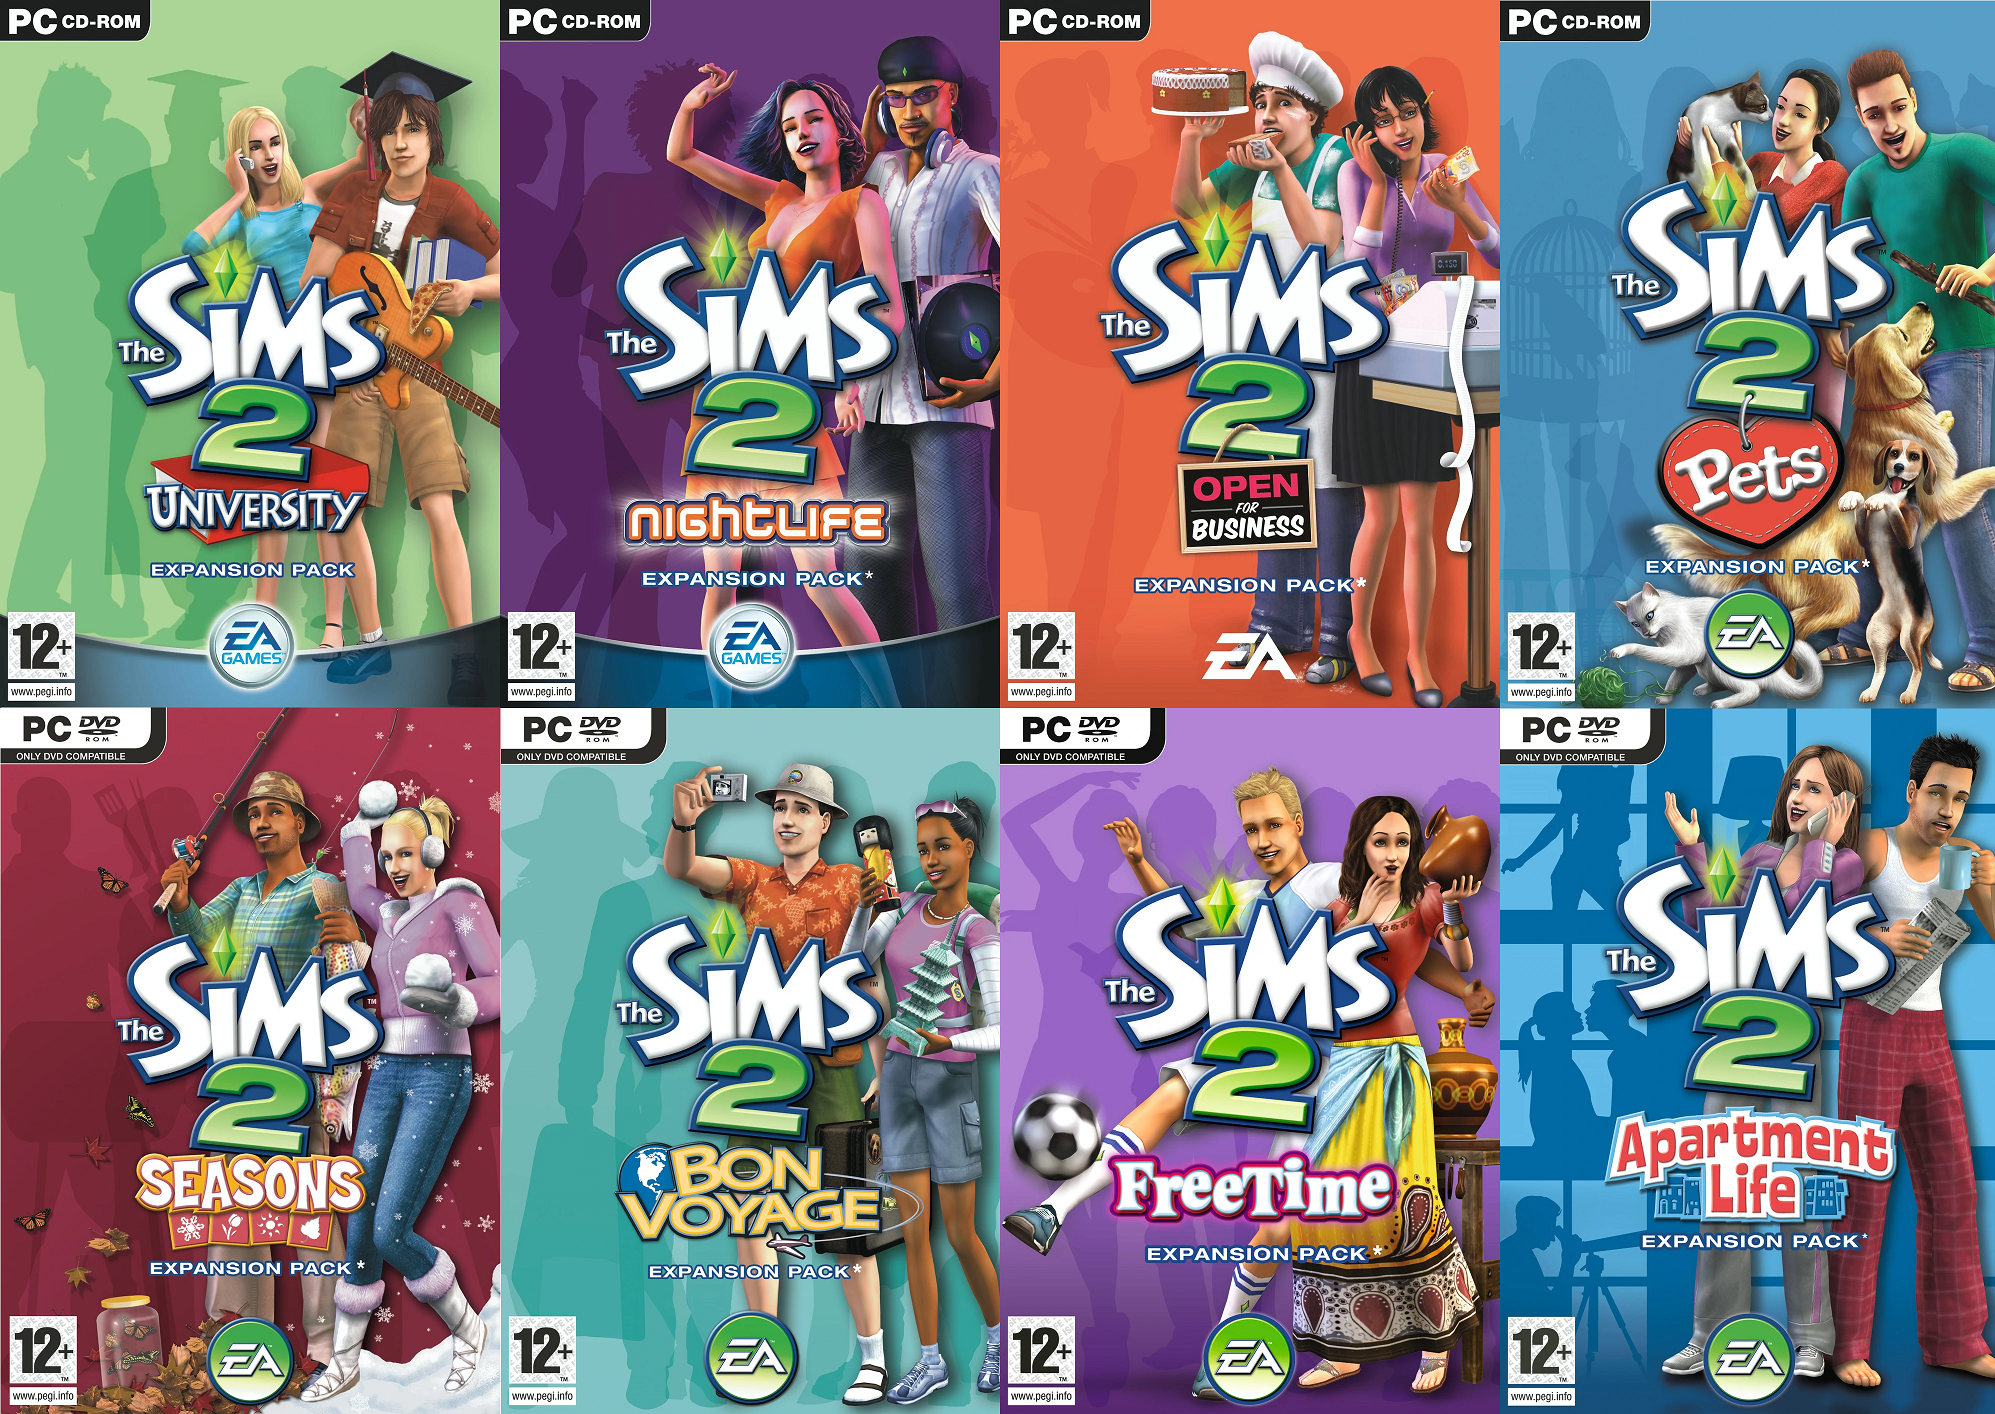 sims 2 expansion packs add on to each other